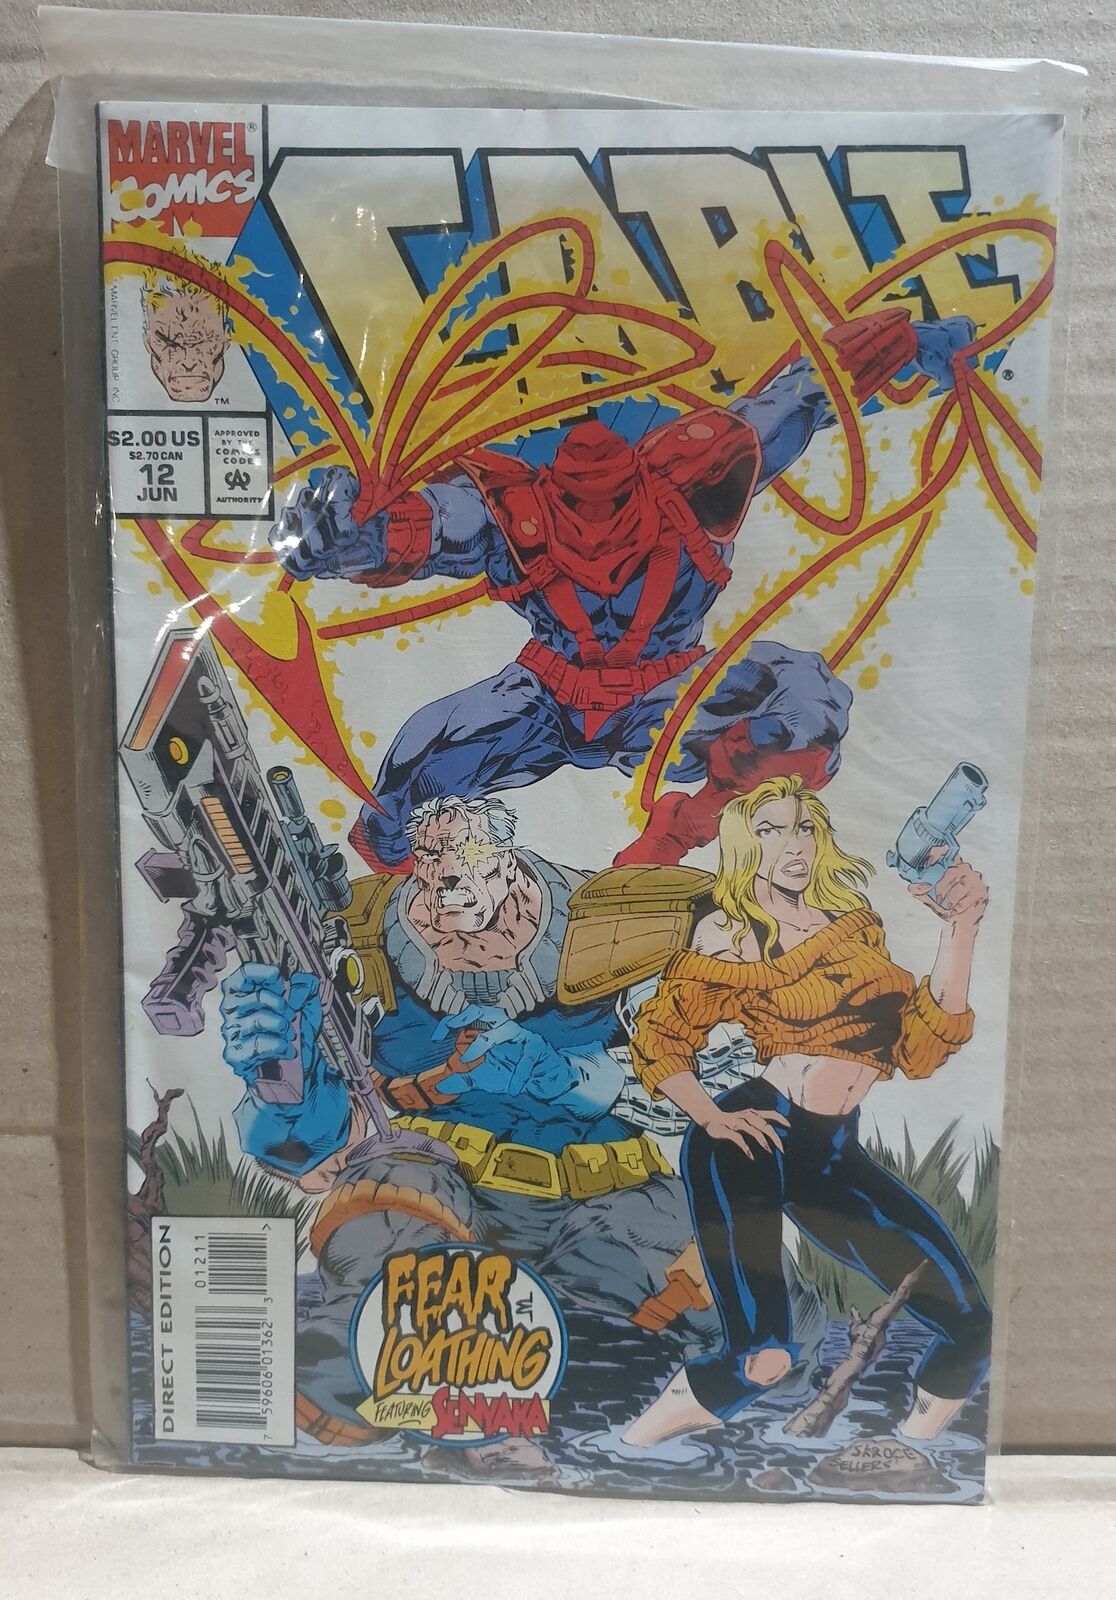 COMIC BOOK - MARVEL CABLE #12 FEAR LOATHING